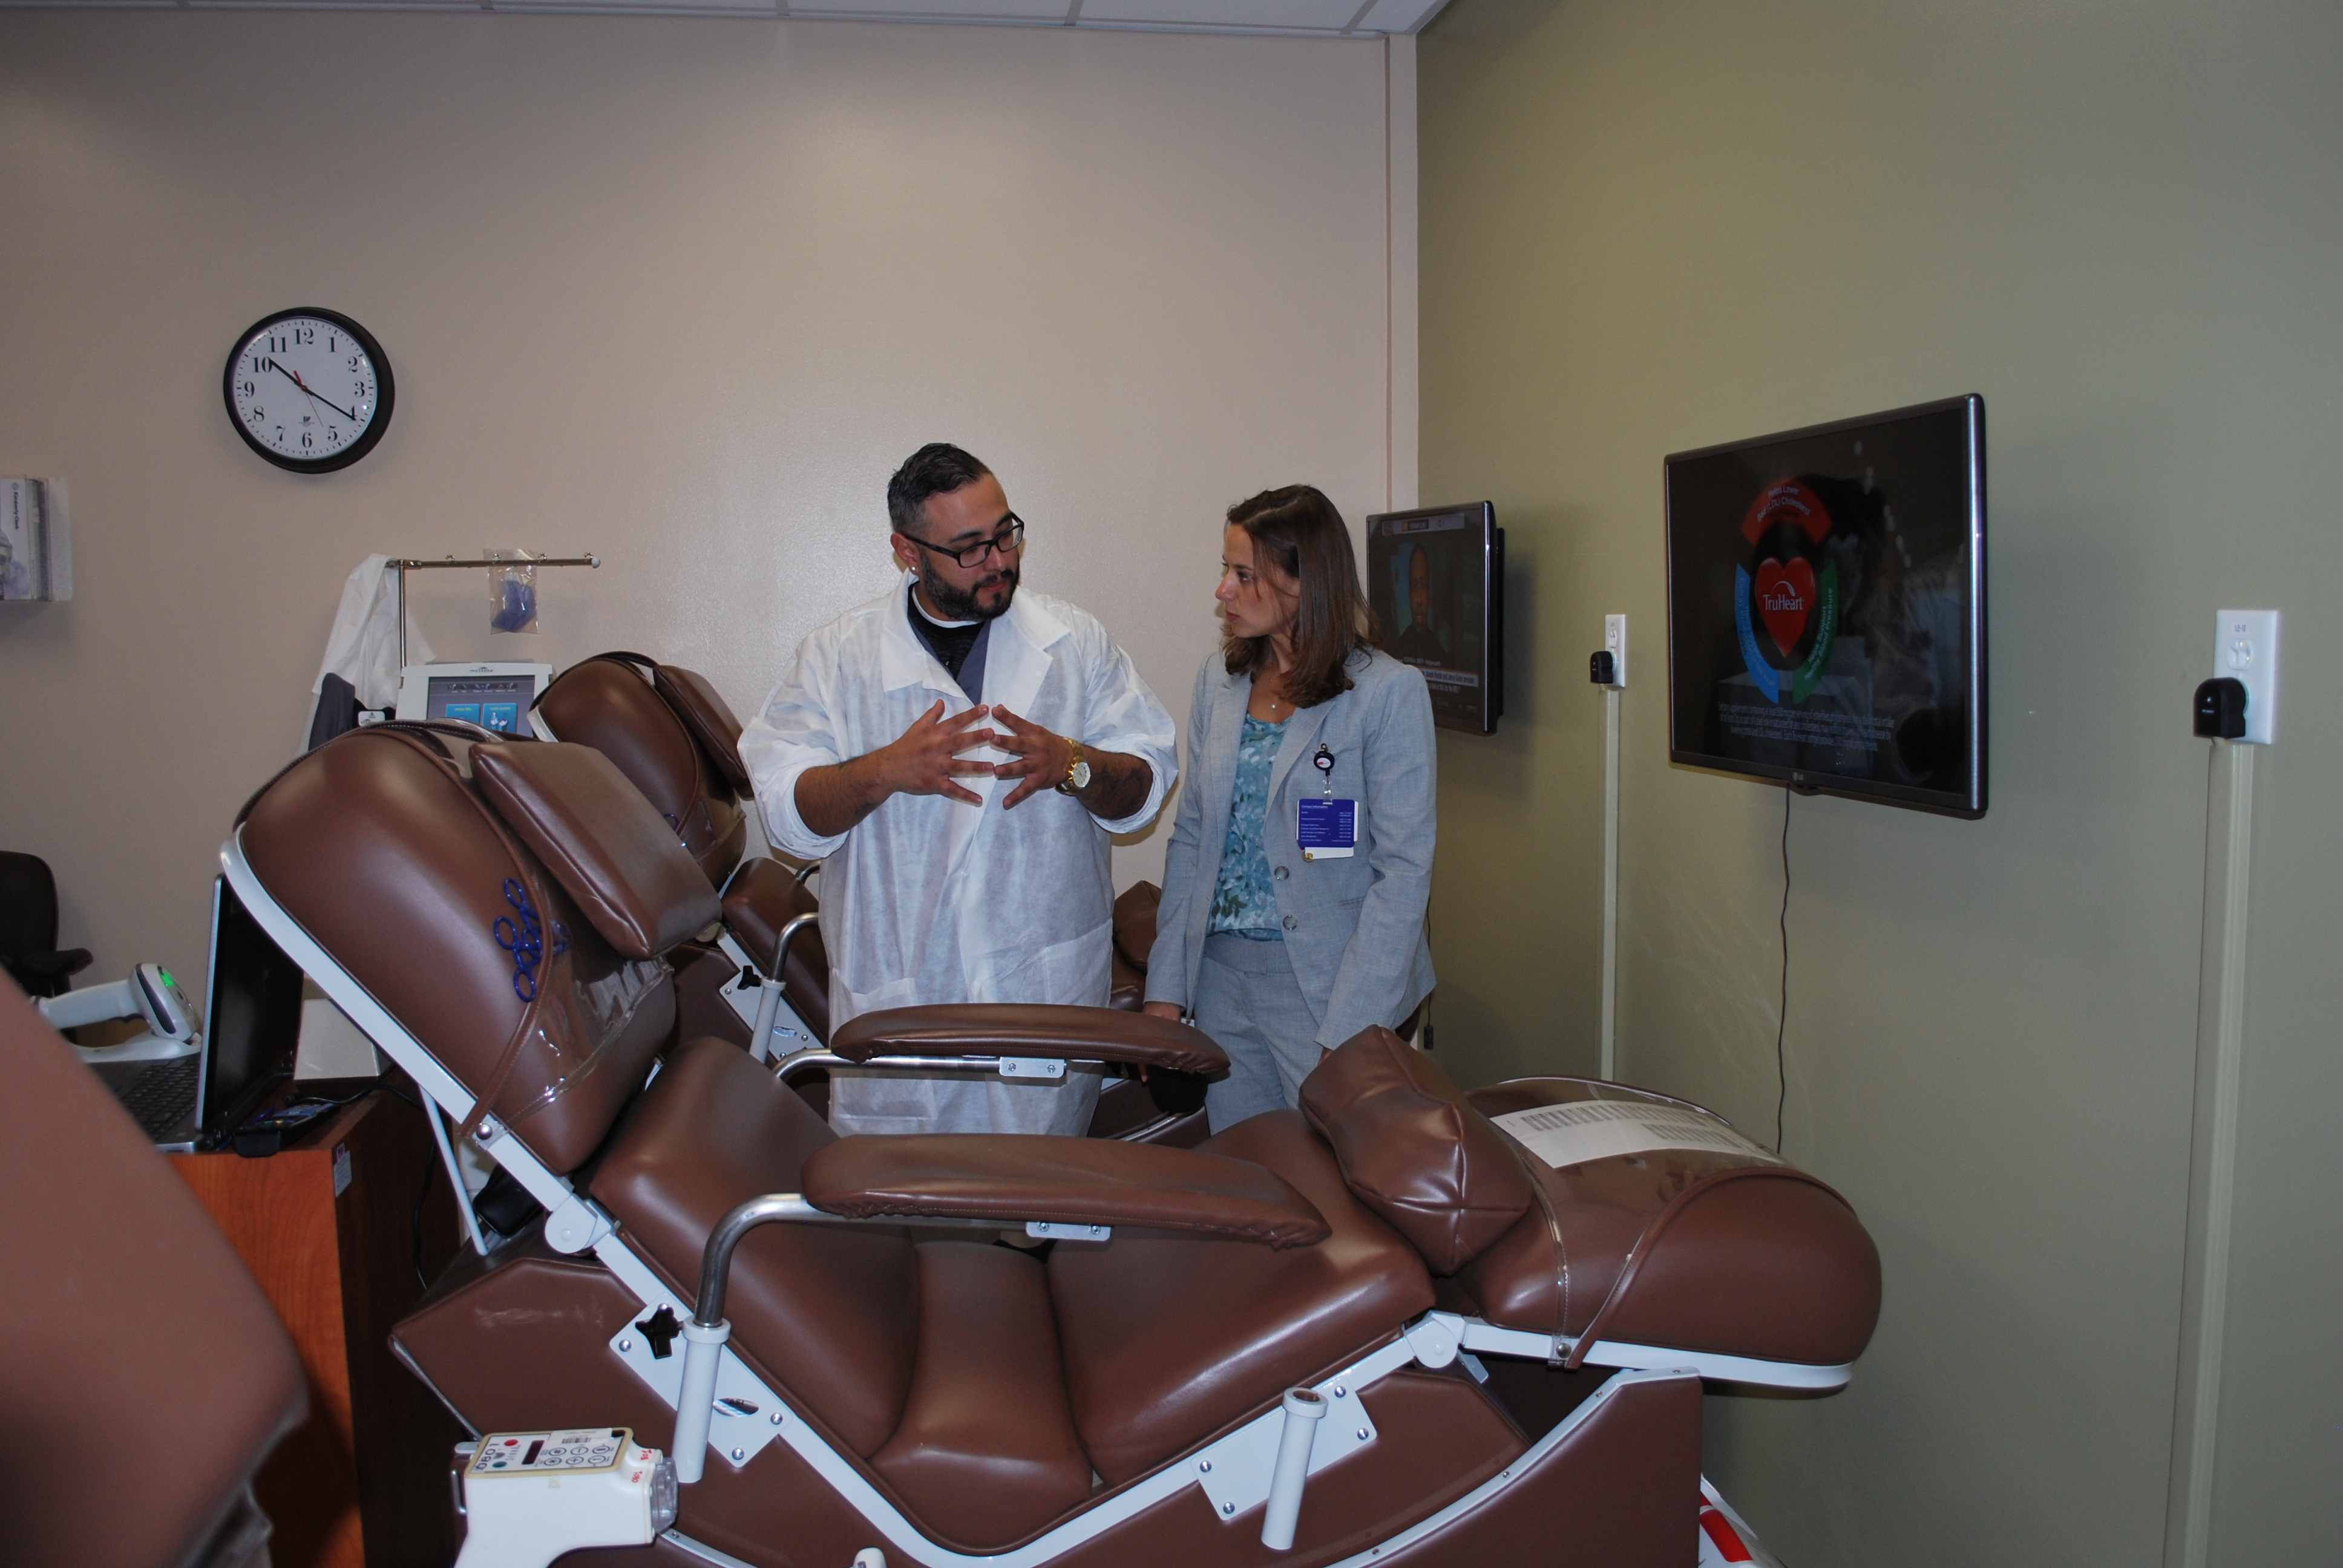 Lab Assistant Ramiro Valenzuela shows Emily Blomberg the new donor center